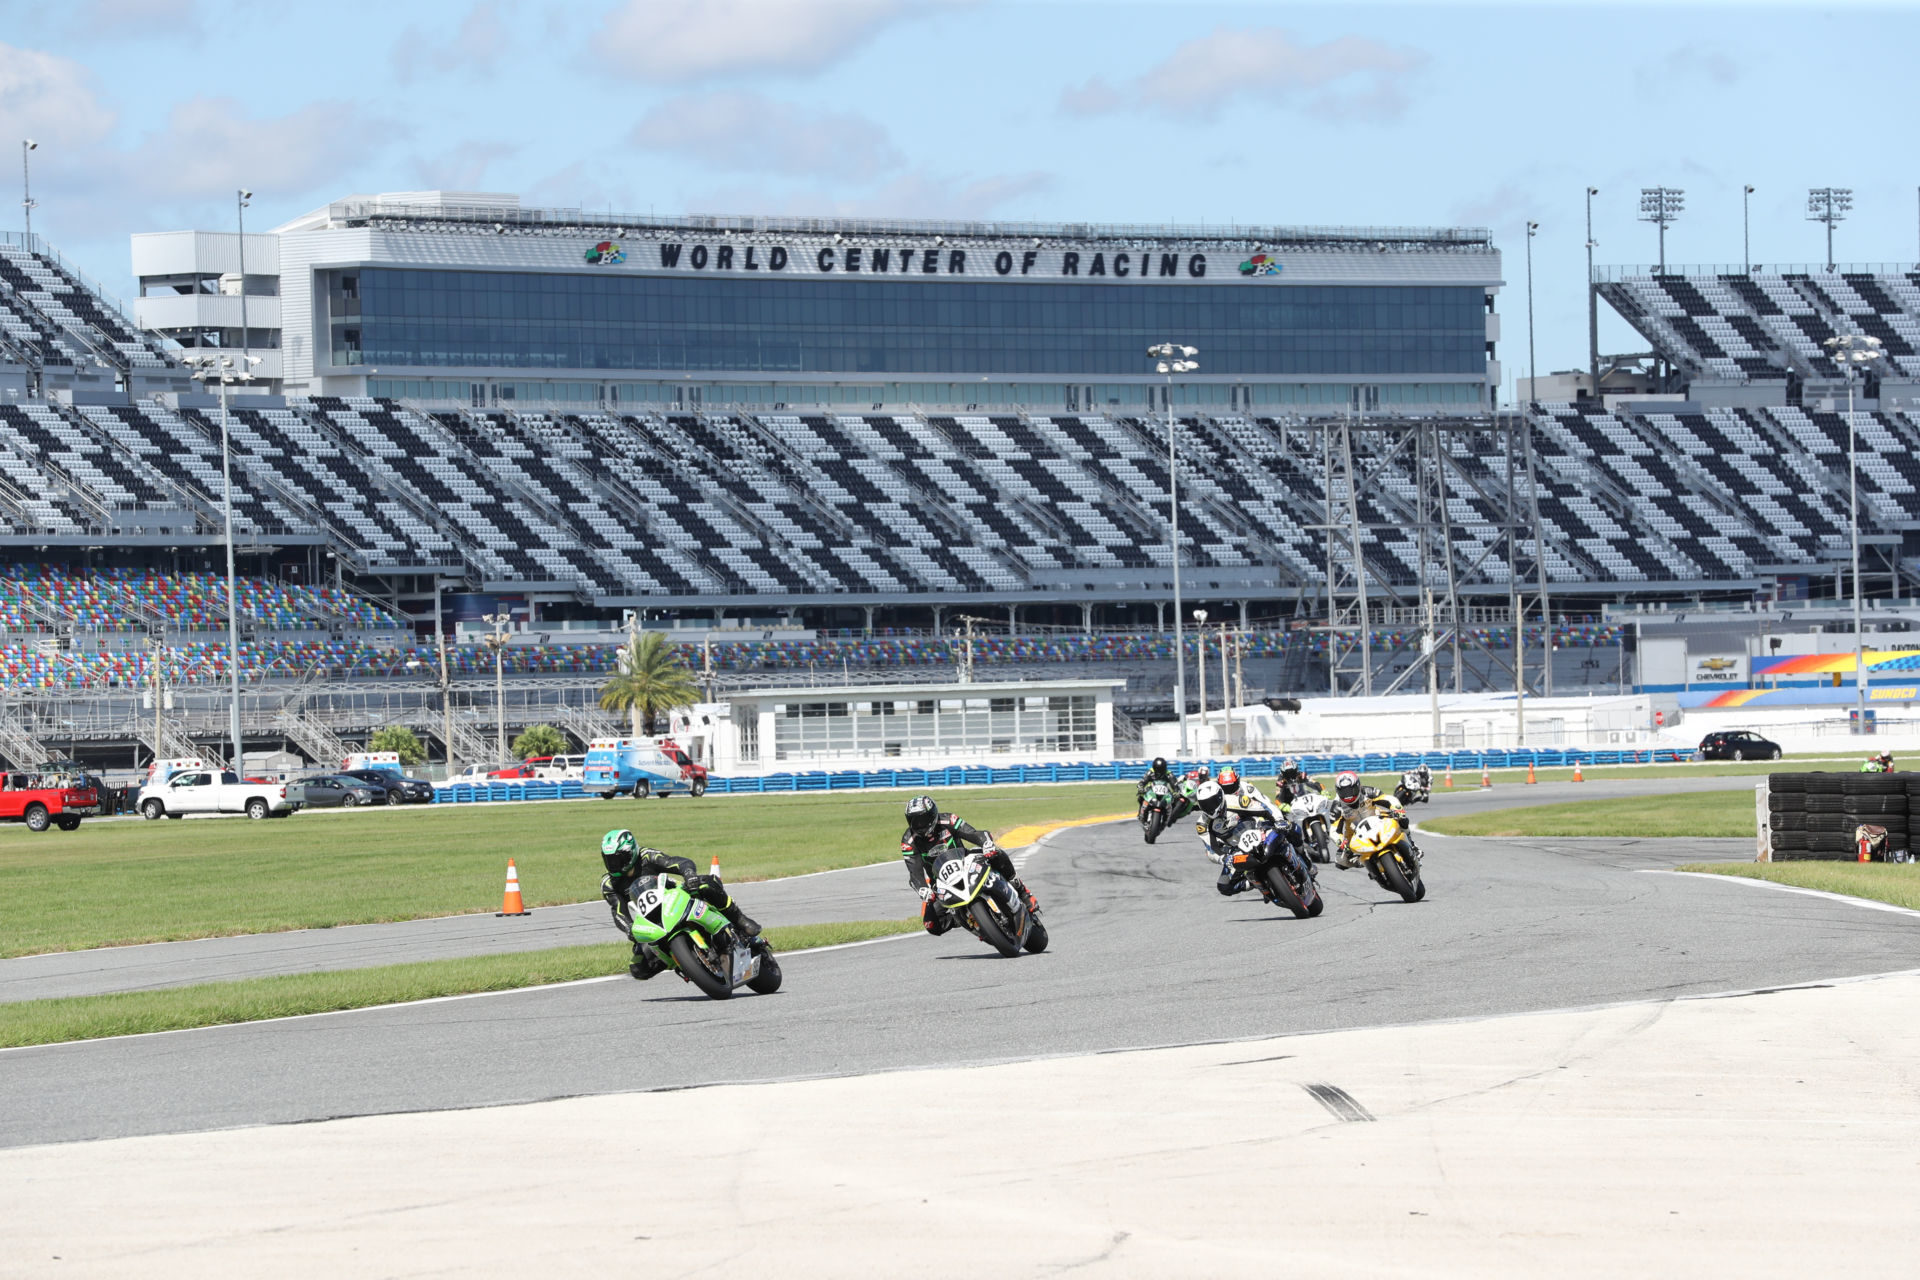 Action from an ASRA SportBike race at Daytona International Speedway. Photo by Brian J. Nelson.